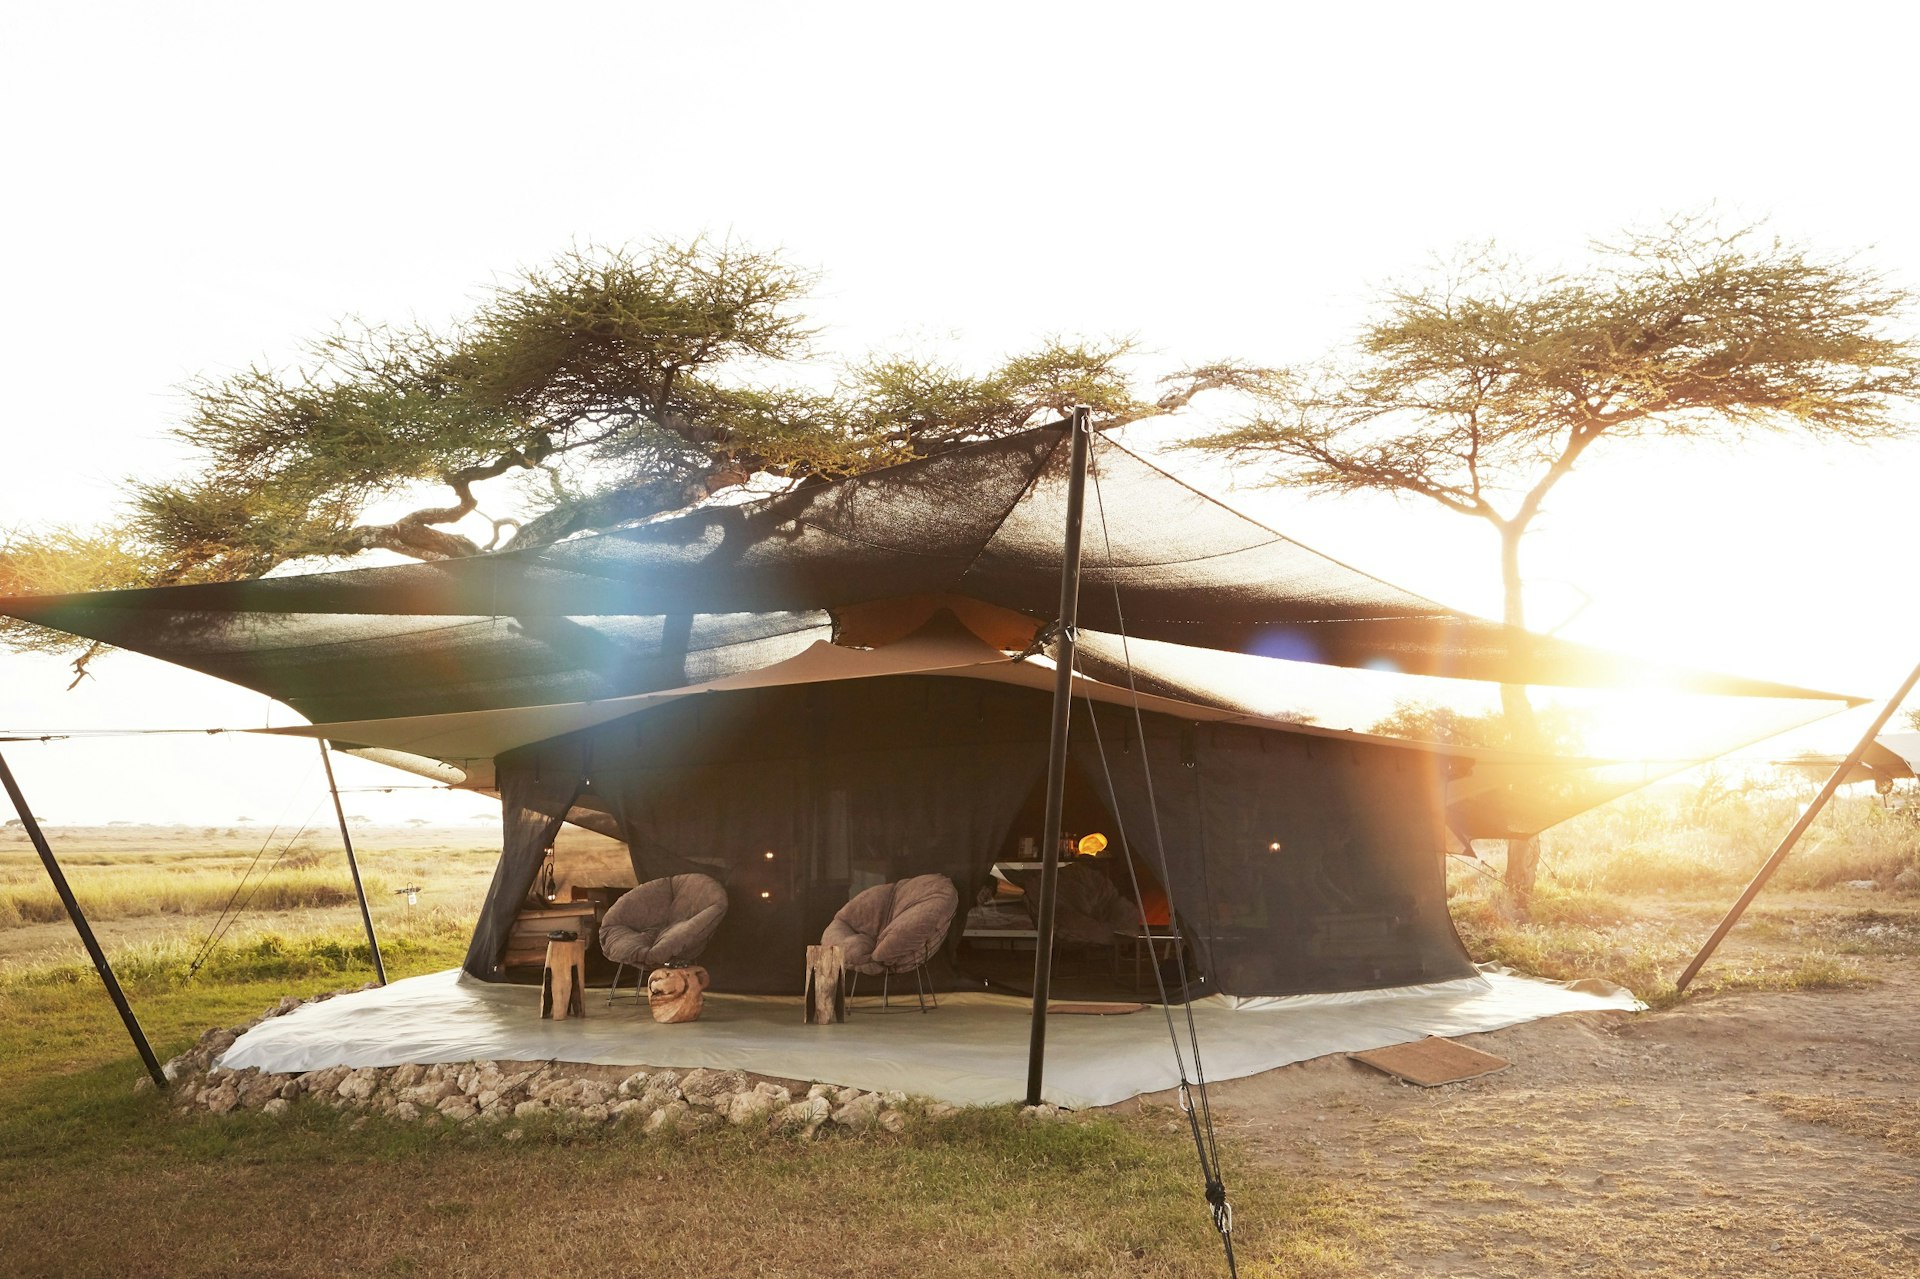 An elegant canvas tent held up by angled metal poles sits suspended beneath an acacia tree on the savanna; there are comfy chairs sitting outside the large tent.